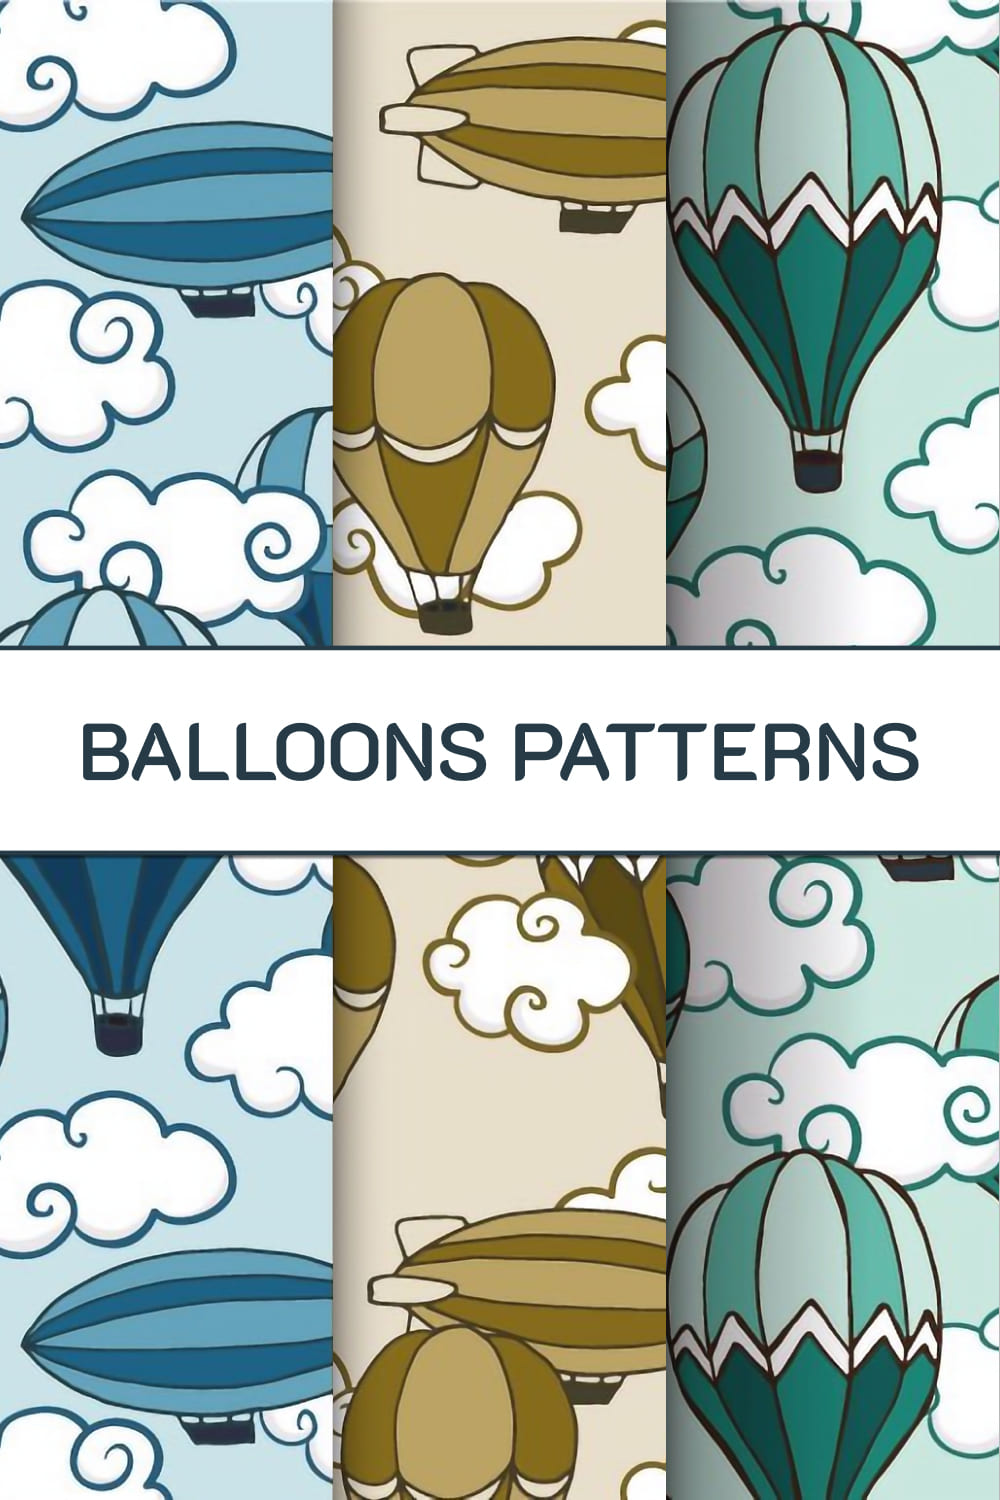 A set of gorgeous patterns with air balloons.